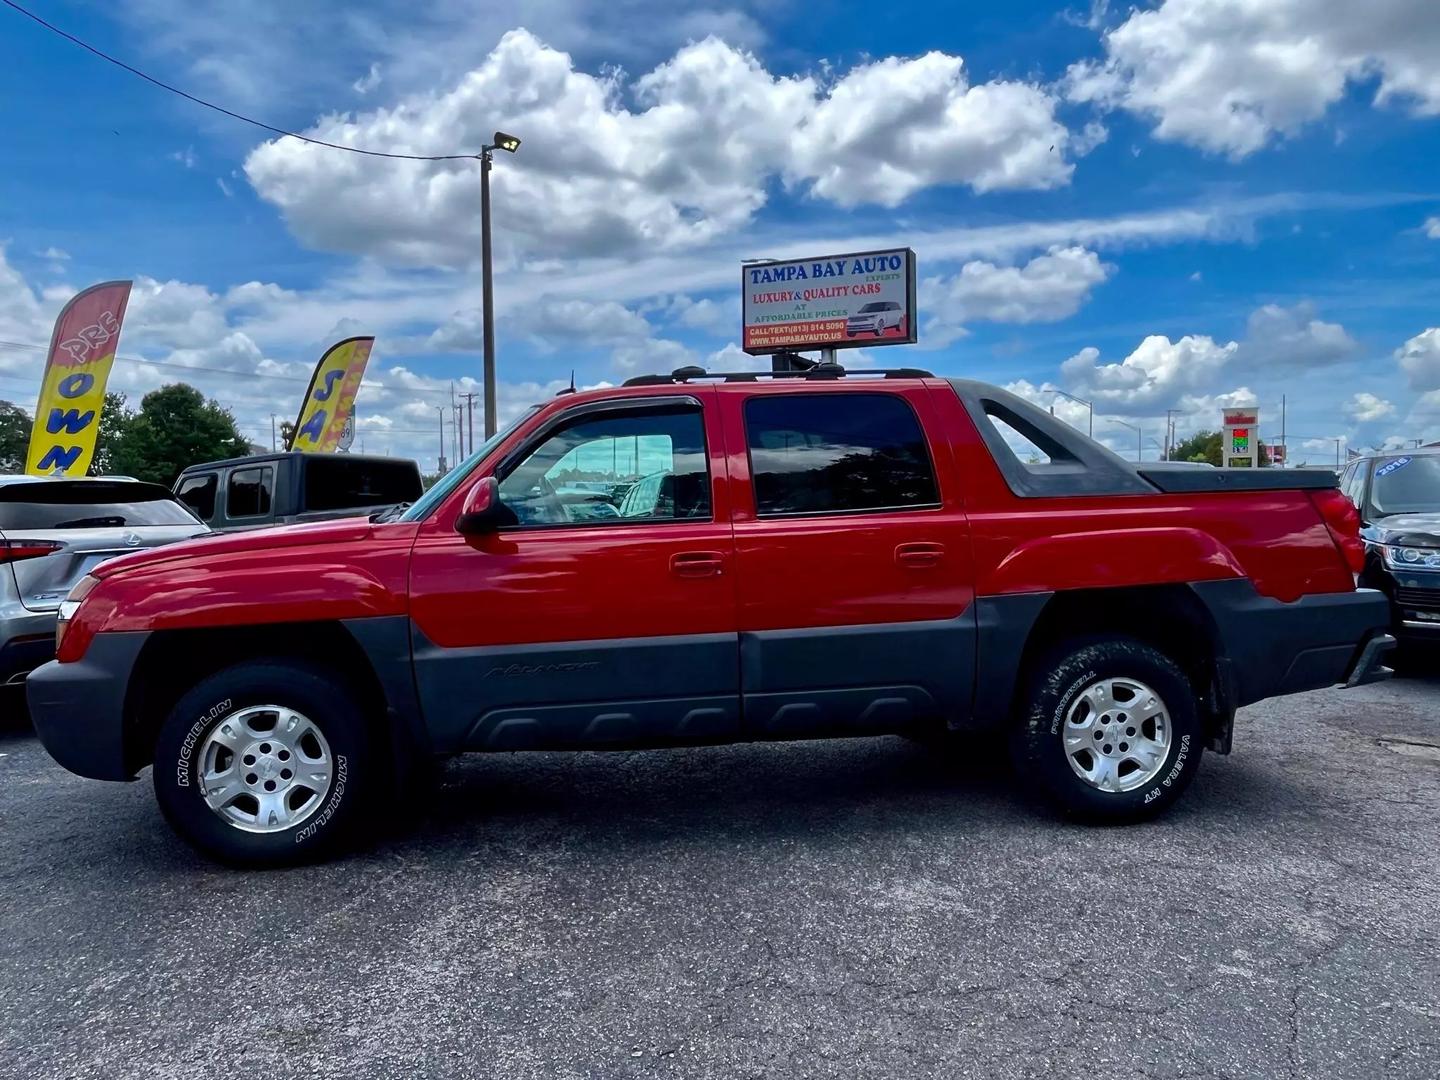 Used 2003 Chevrolet Avalanche Base with VIN 3GNEK13T23G186742 for sale in Tampa, FL